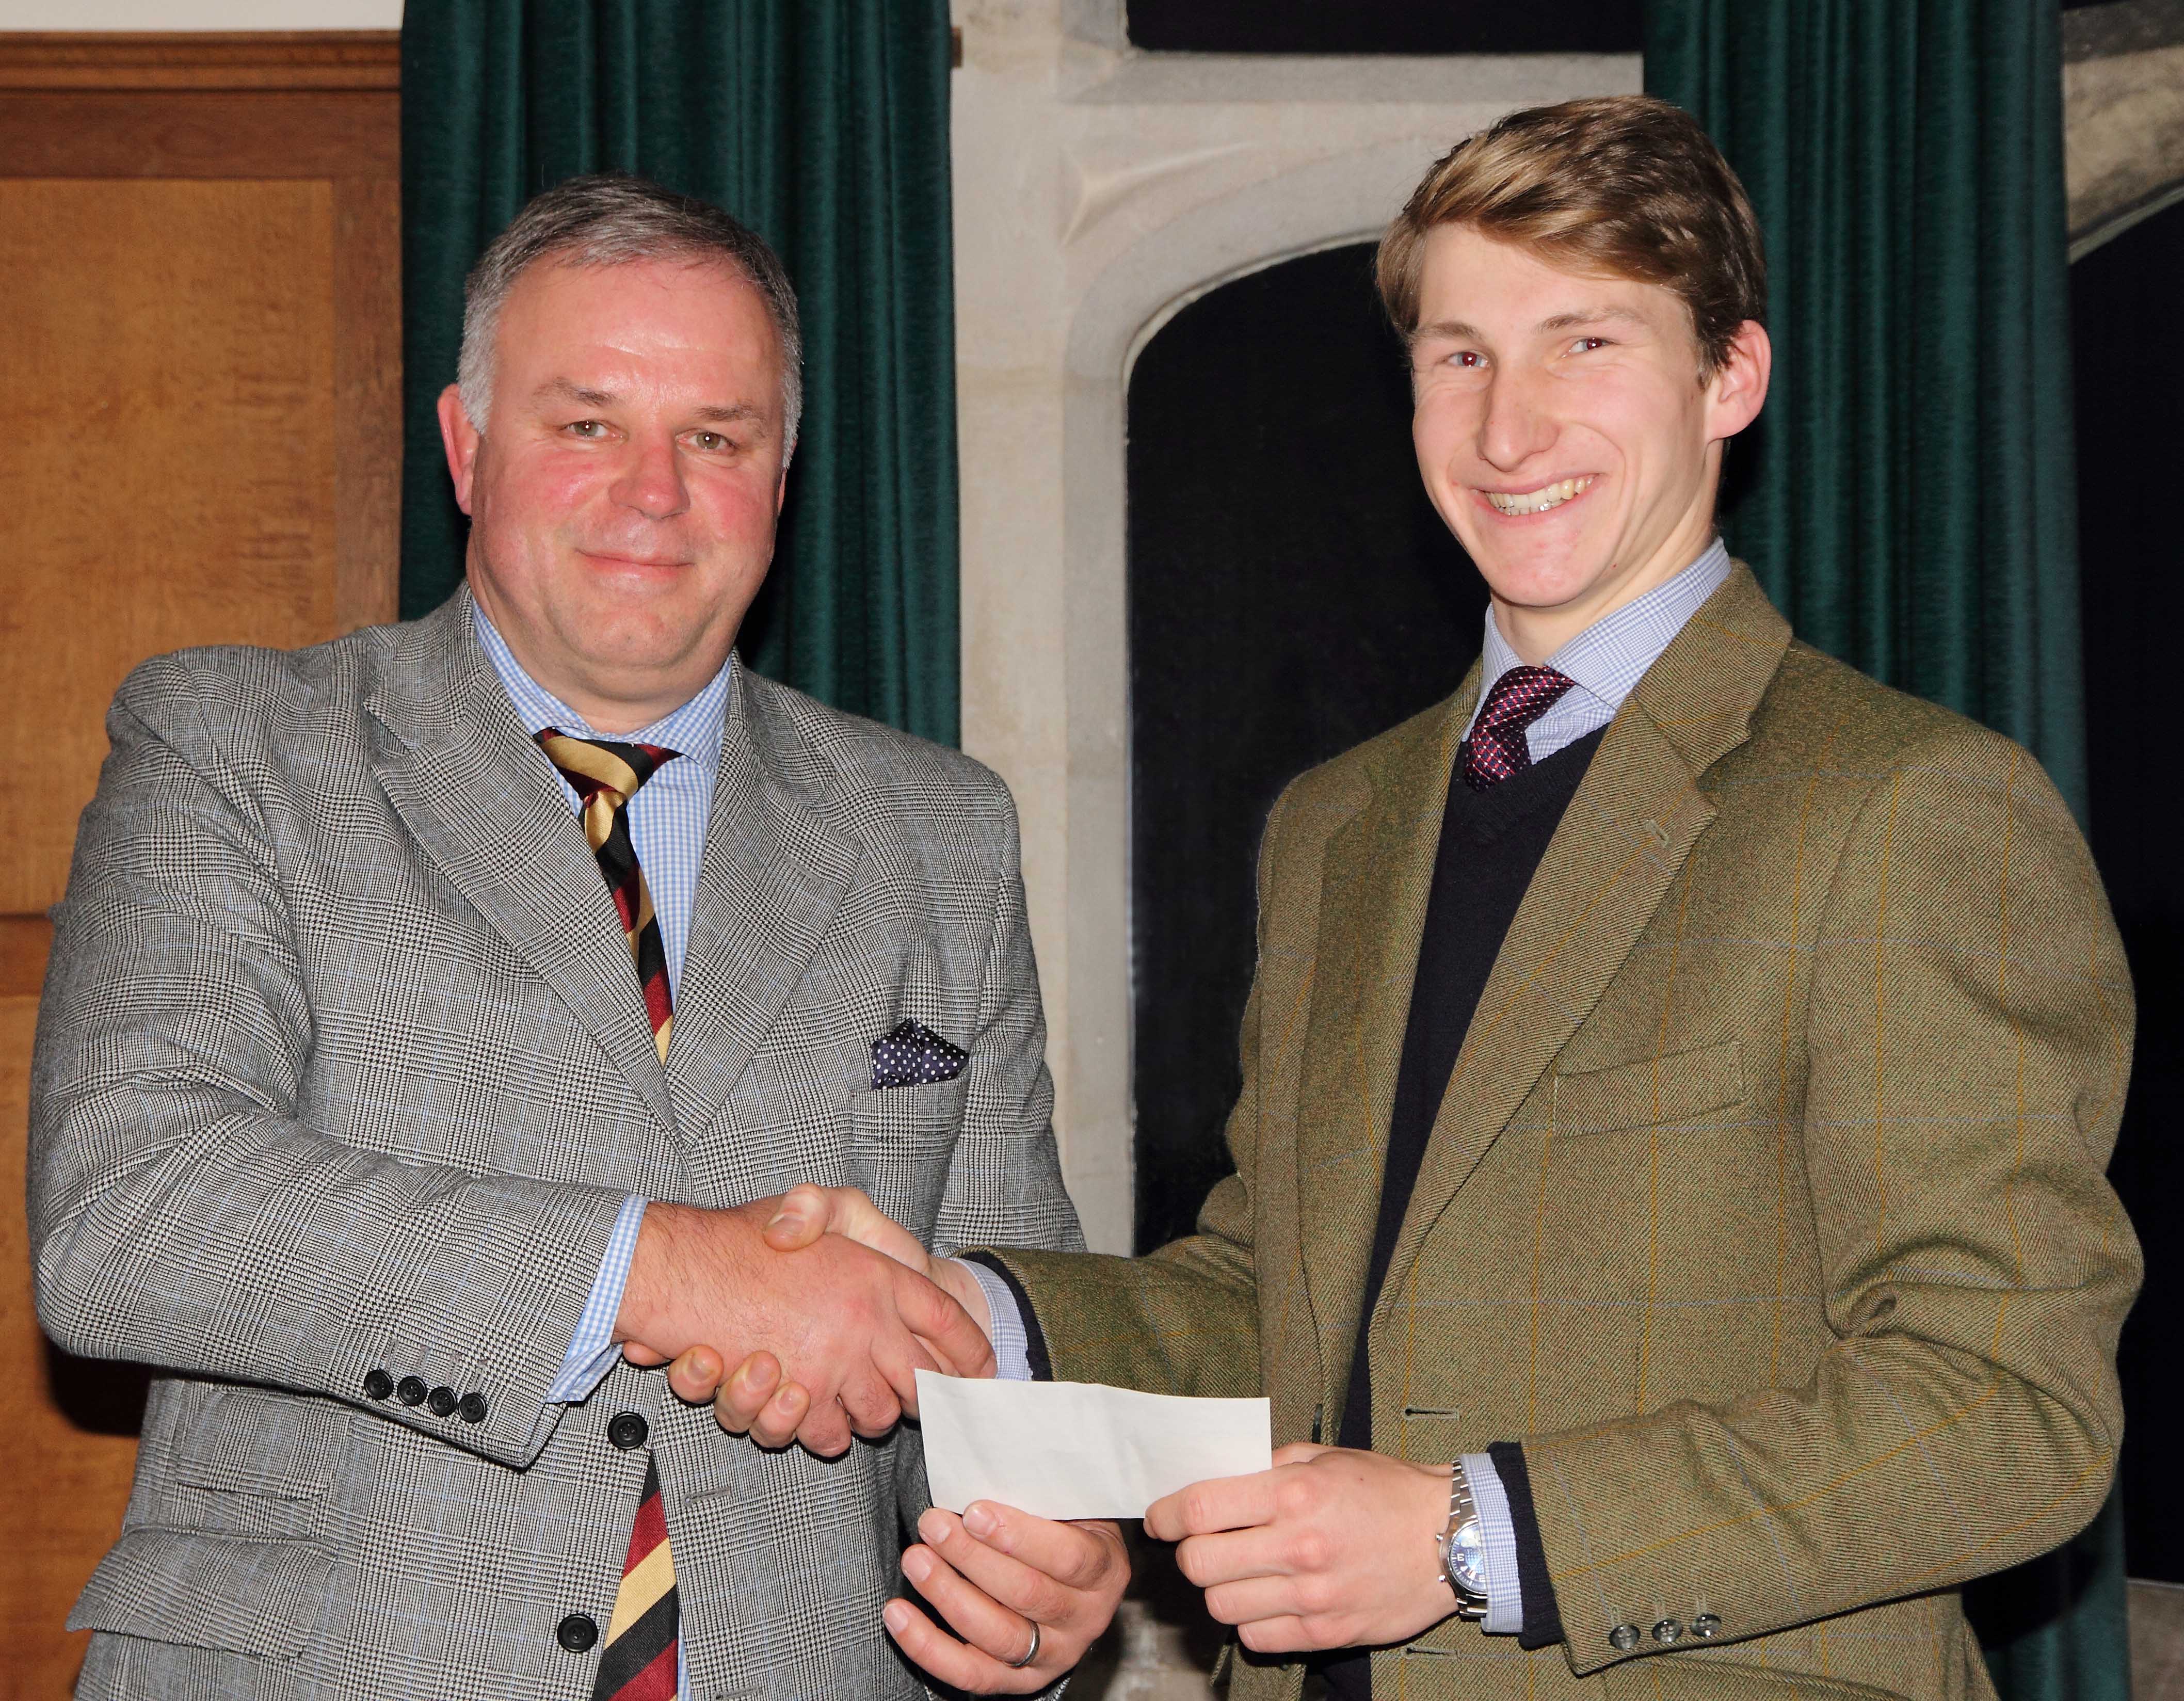 Andrew Jackson, managing partner at Fisher German, presents Tom Vacher with his cheque as part of the Henry Sale Graduate Bursary